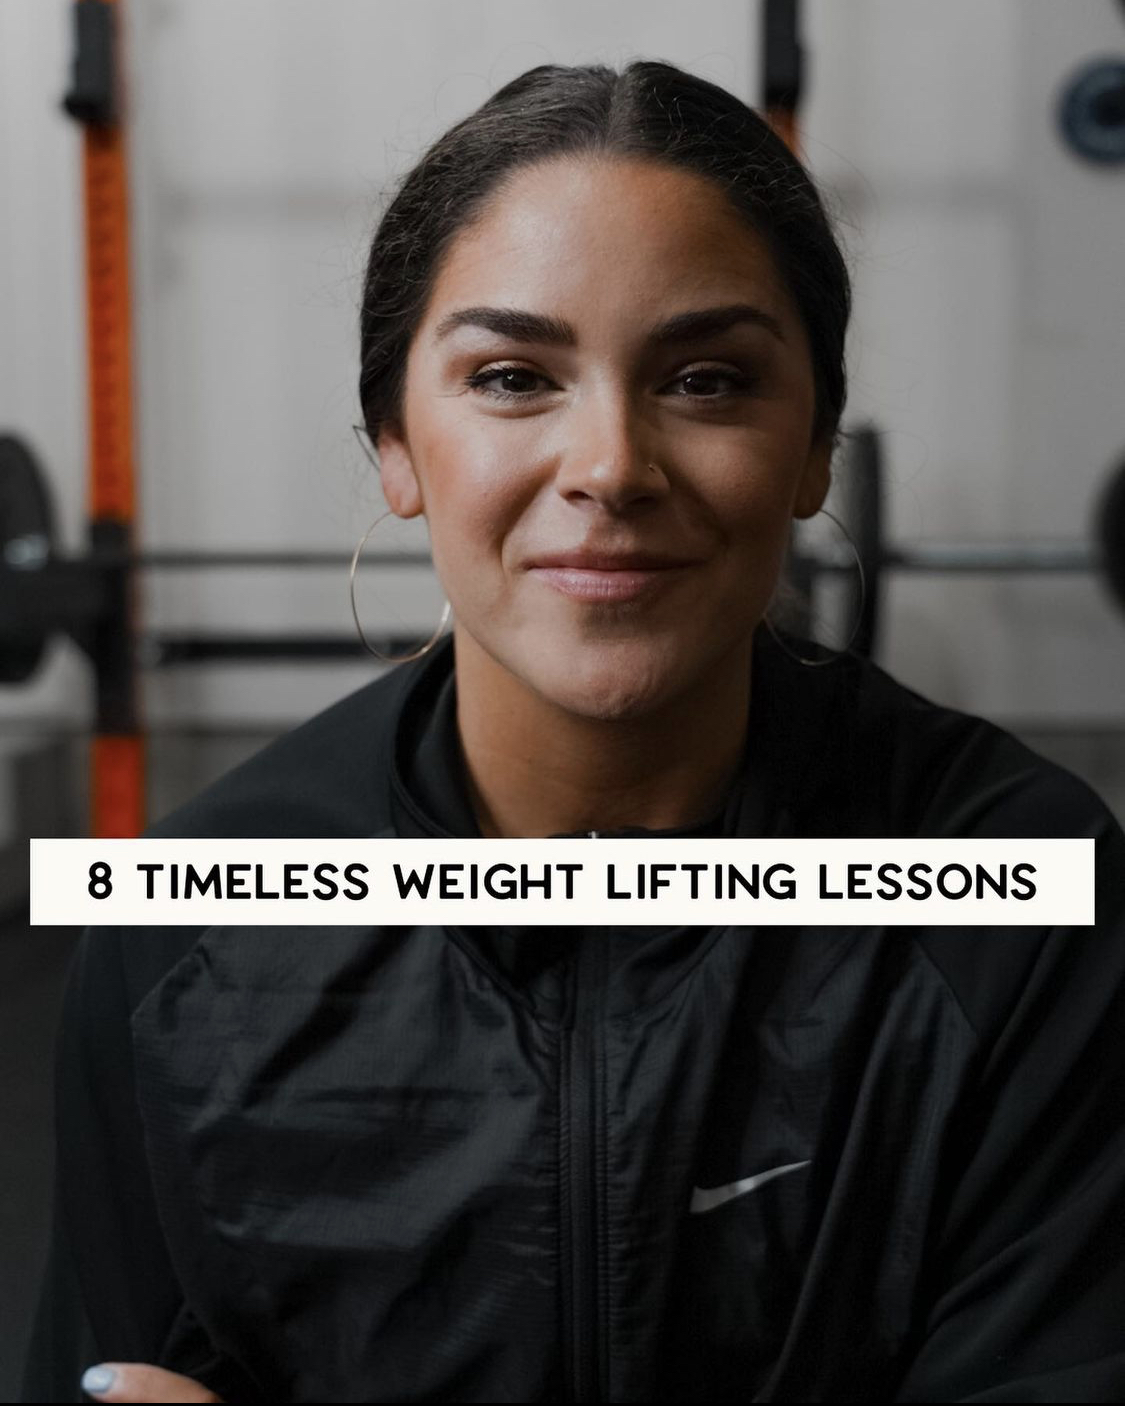 8 timeless weight lifting lessons with Annie Miller